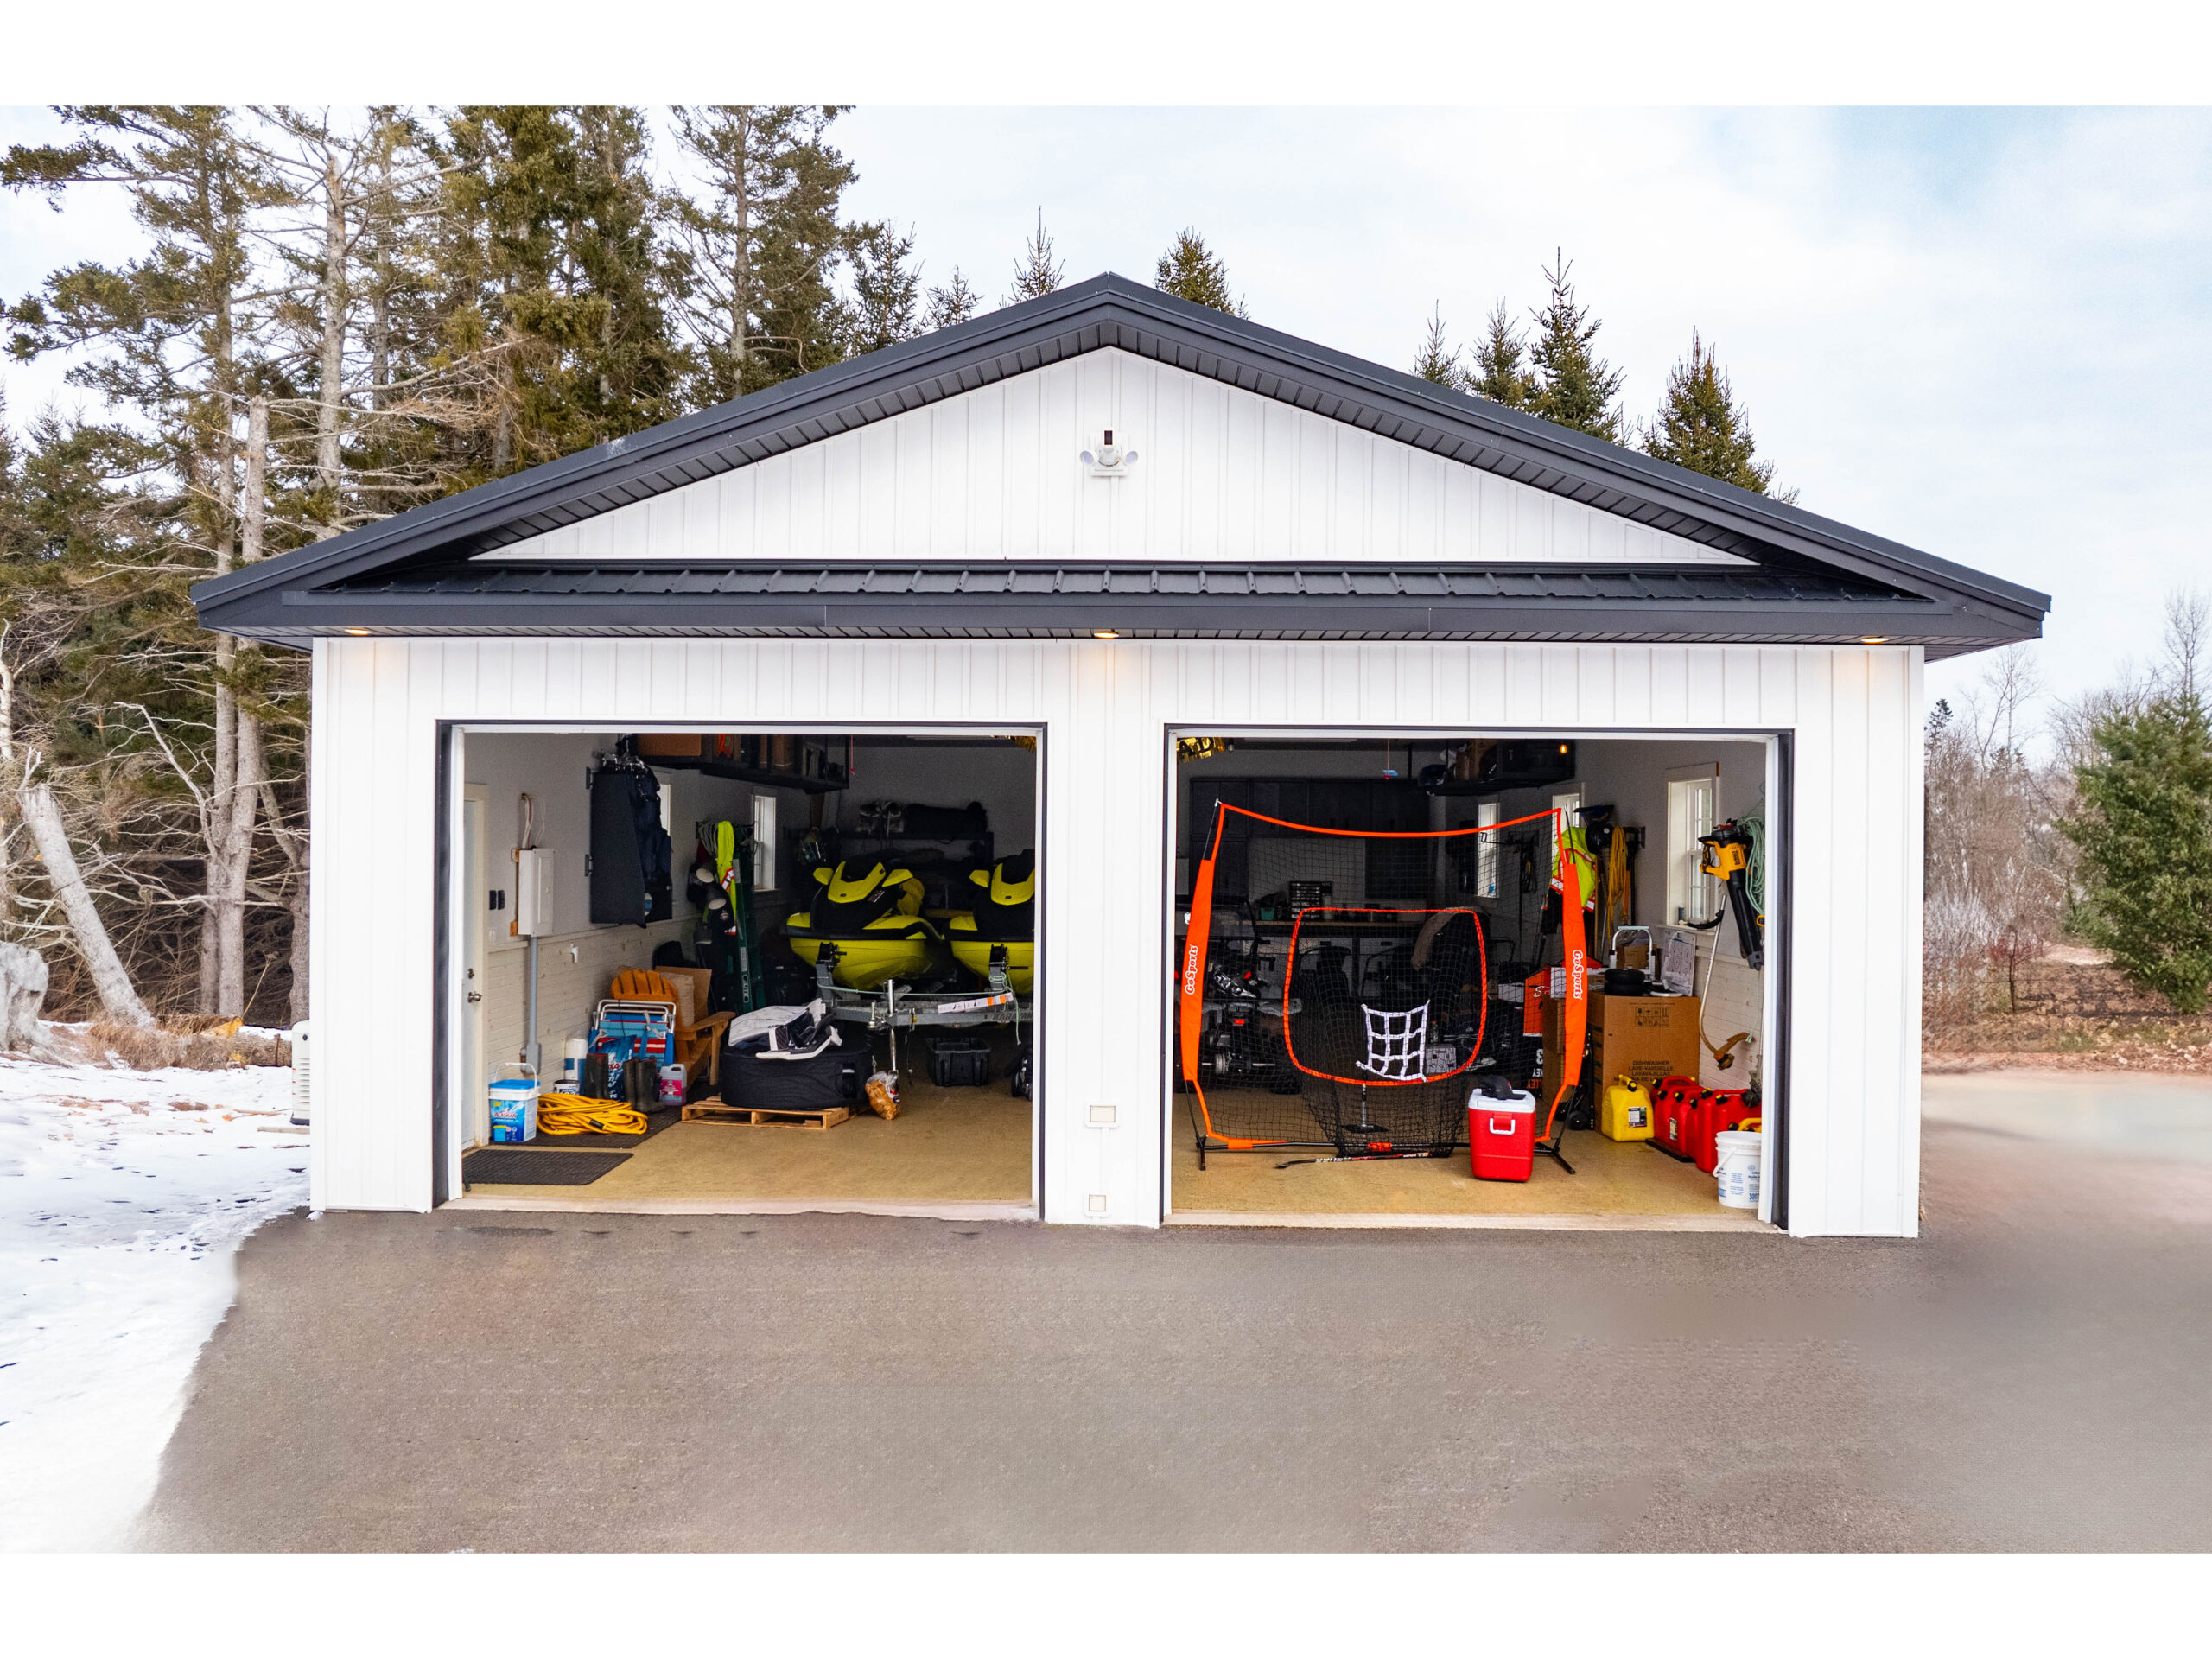 A detached double garage with a white exterior and black trim. Both doors are open, revealing lots of storage space.